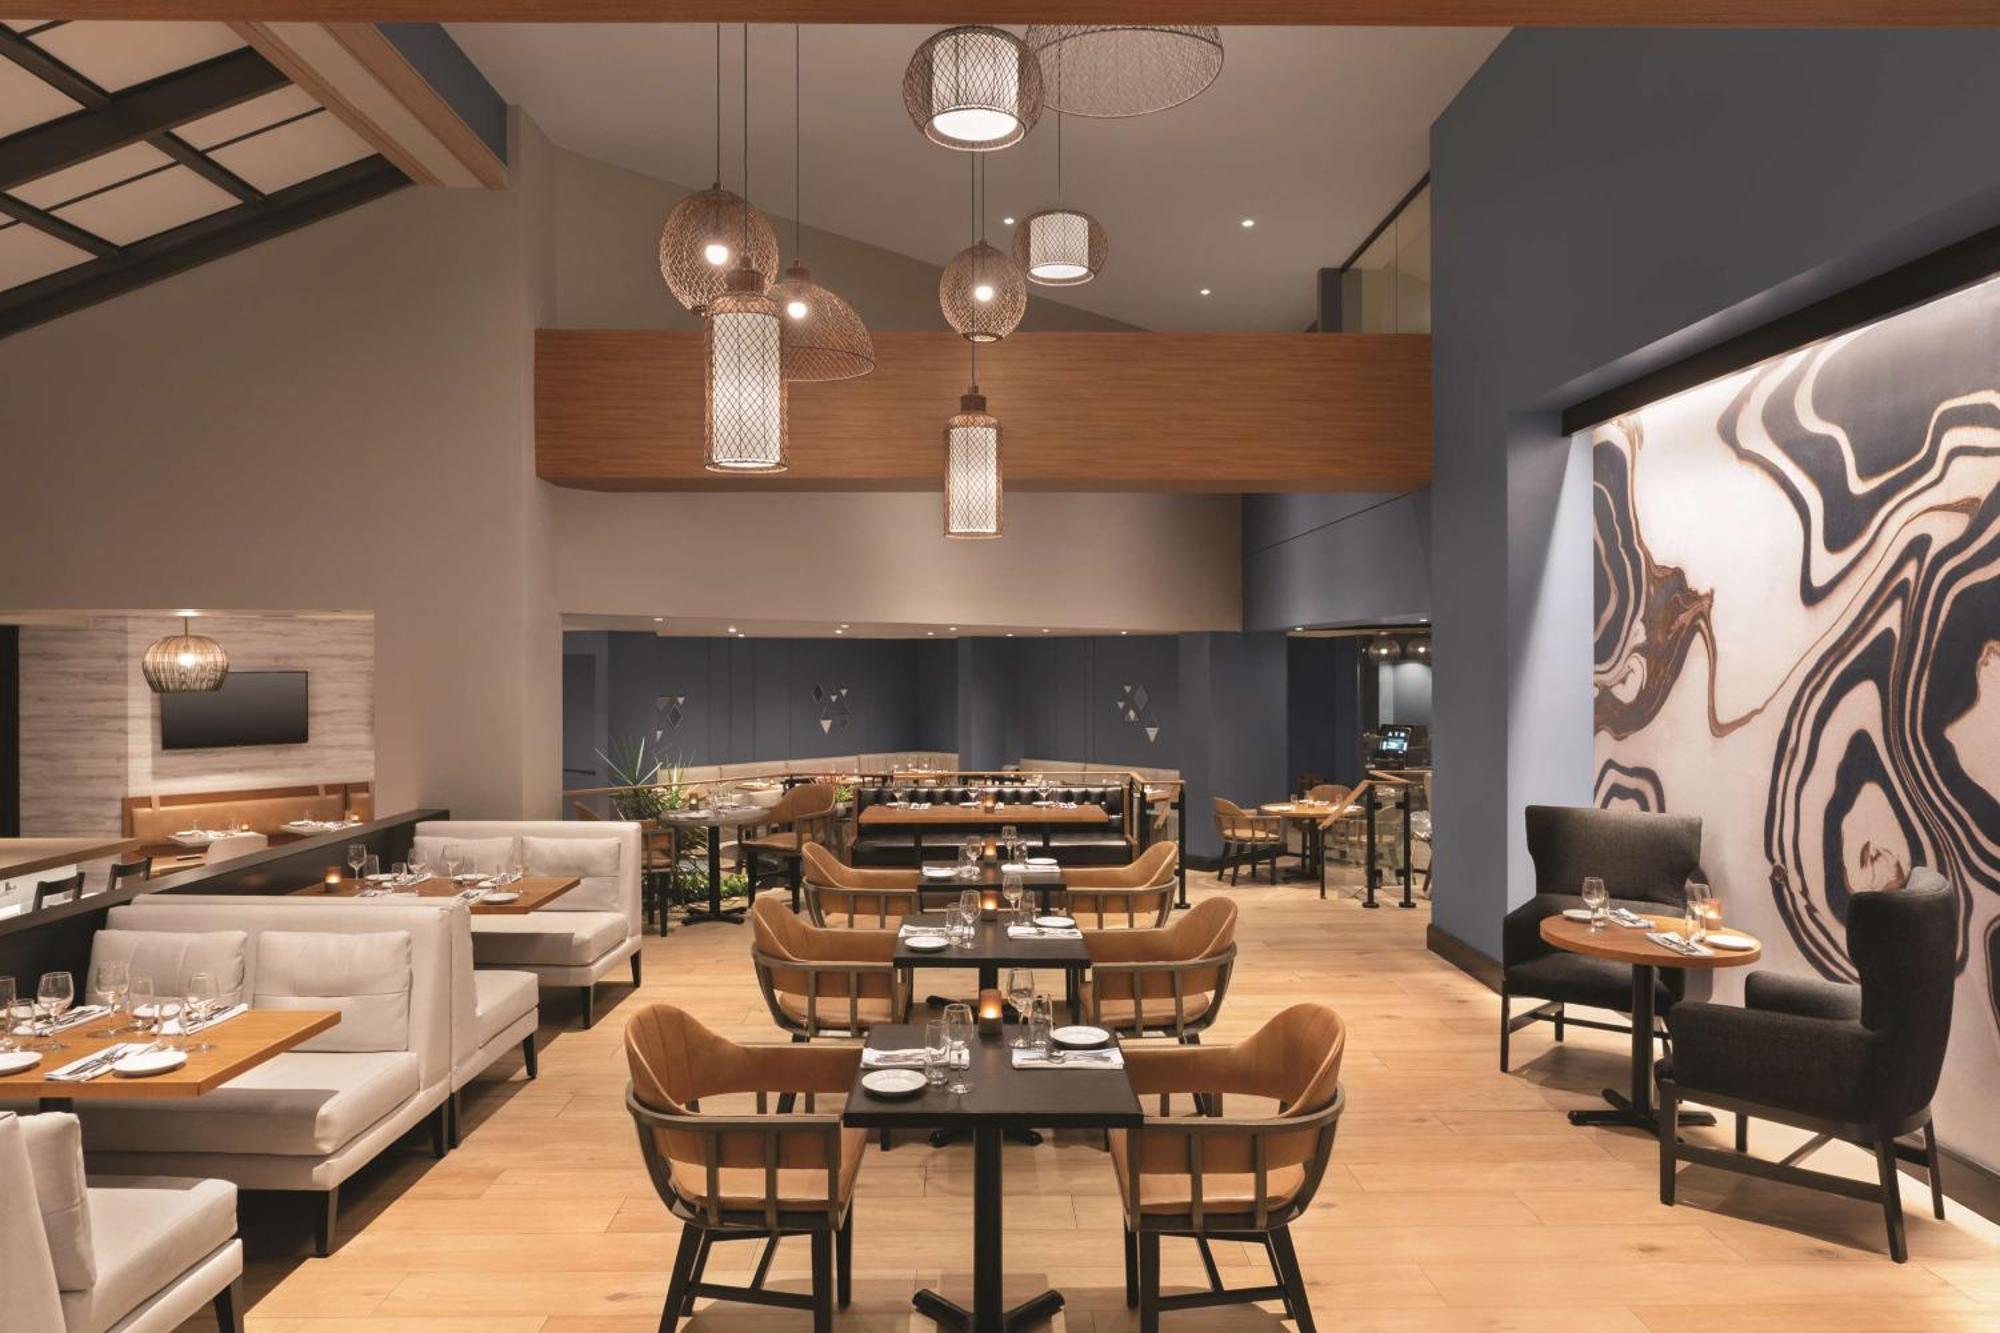 Doubletree By Hilton Tampa Rocky Point Waterfront酒店 外观 照片